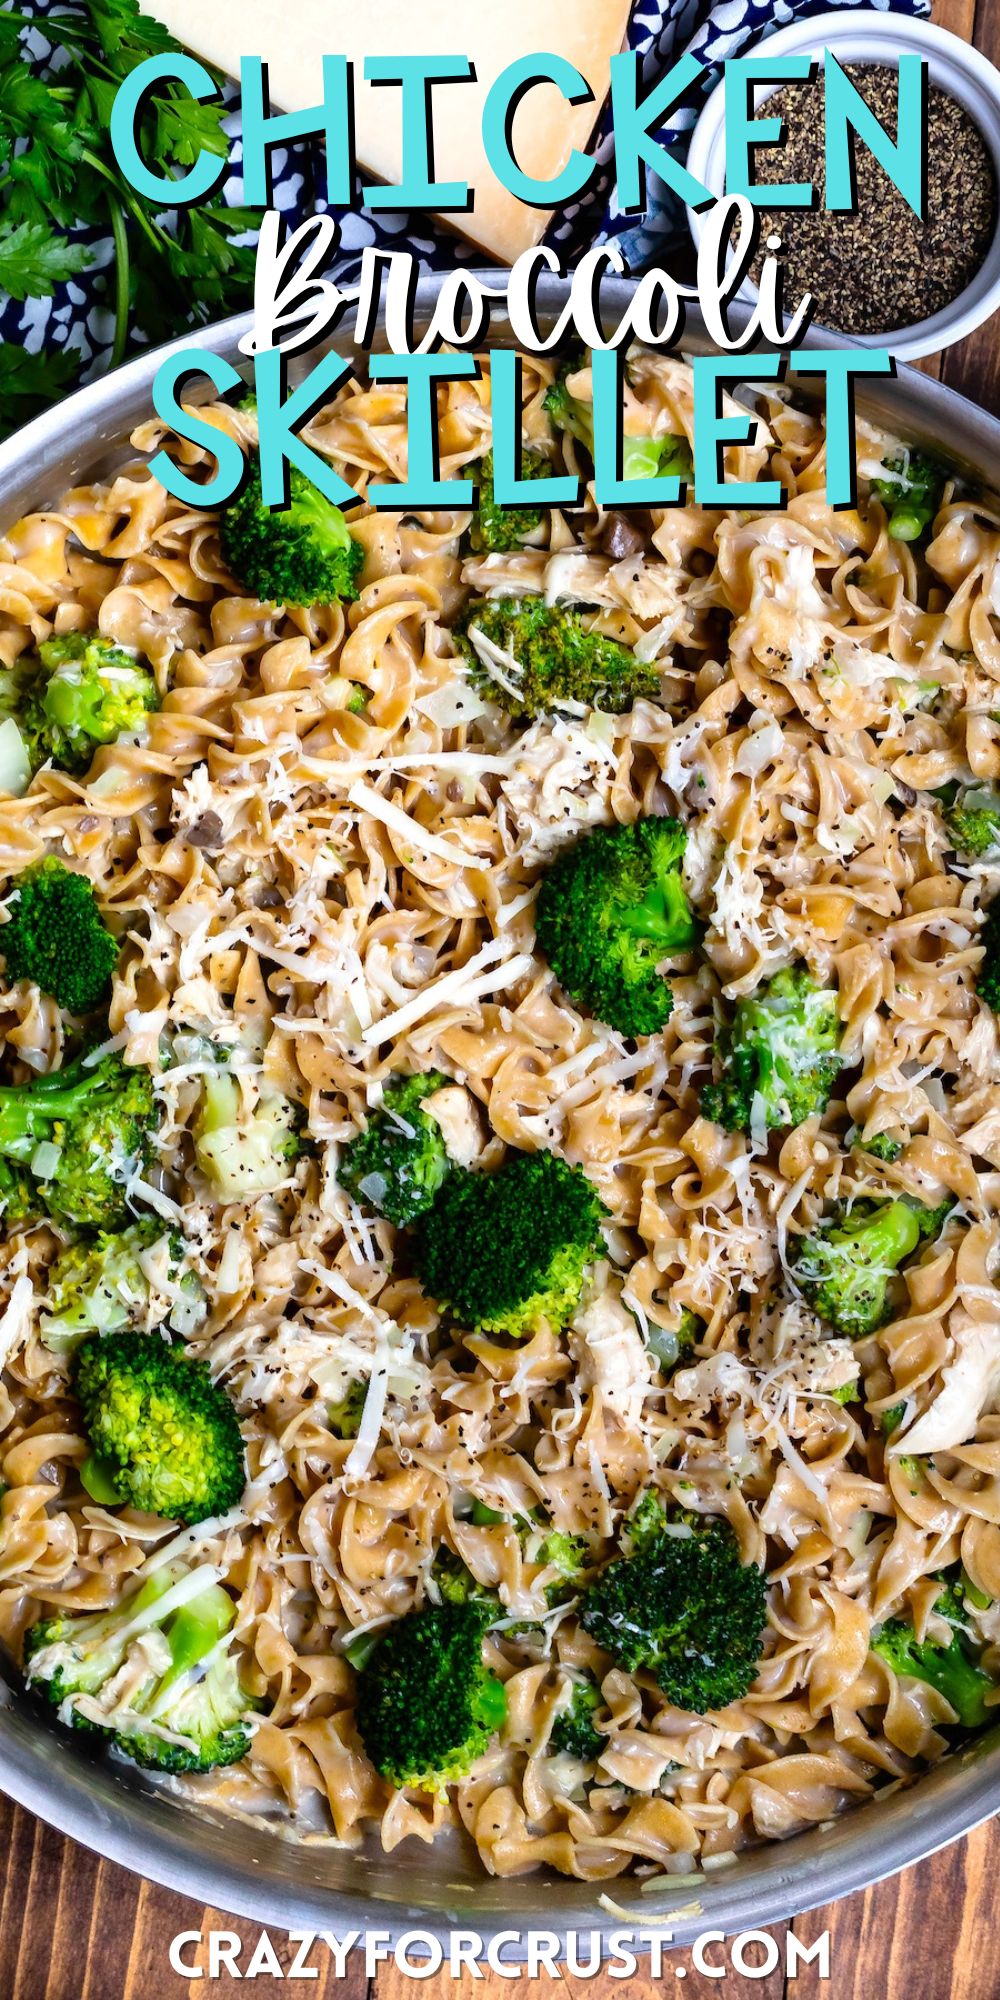 pasta mixed with broccoli in a silver skillet with words on the image.